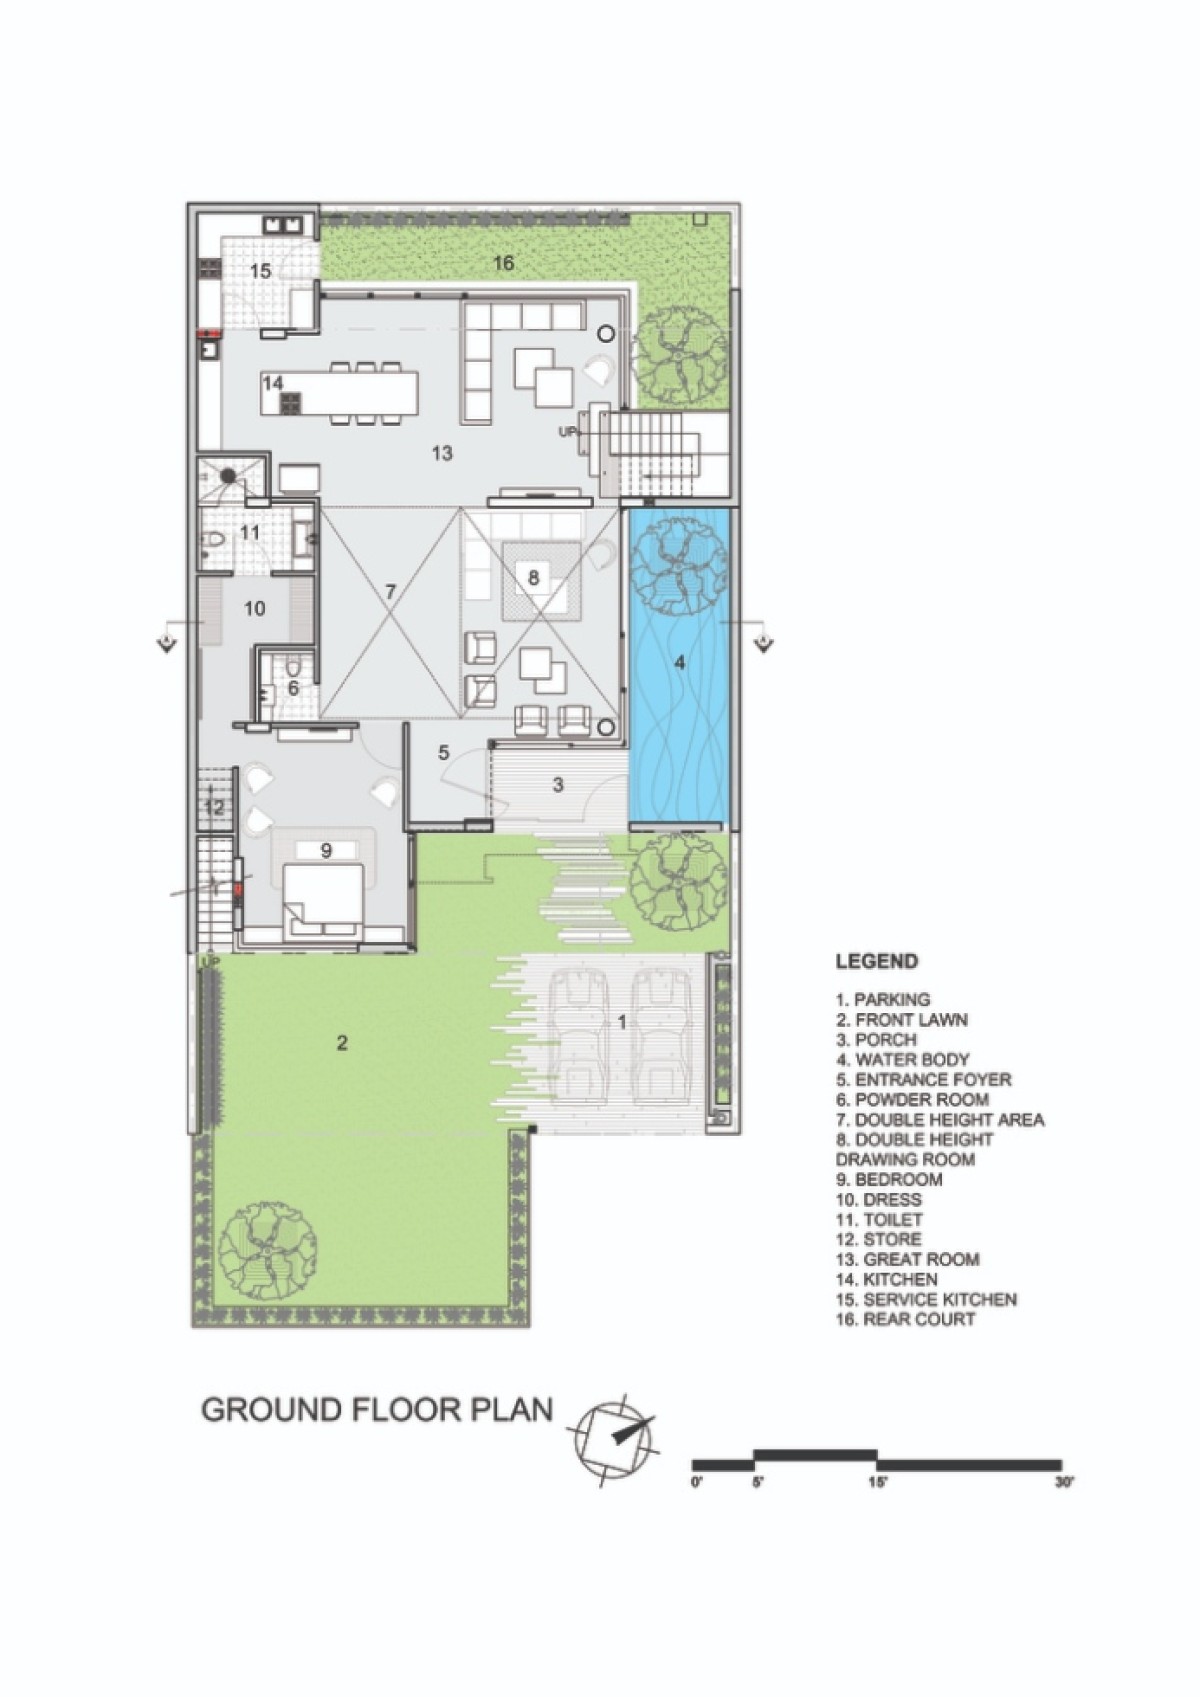 Ground Floor Plan of Residence 913 by Charged Voids